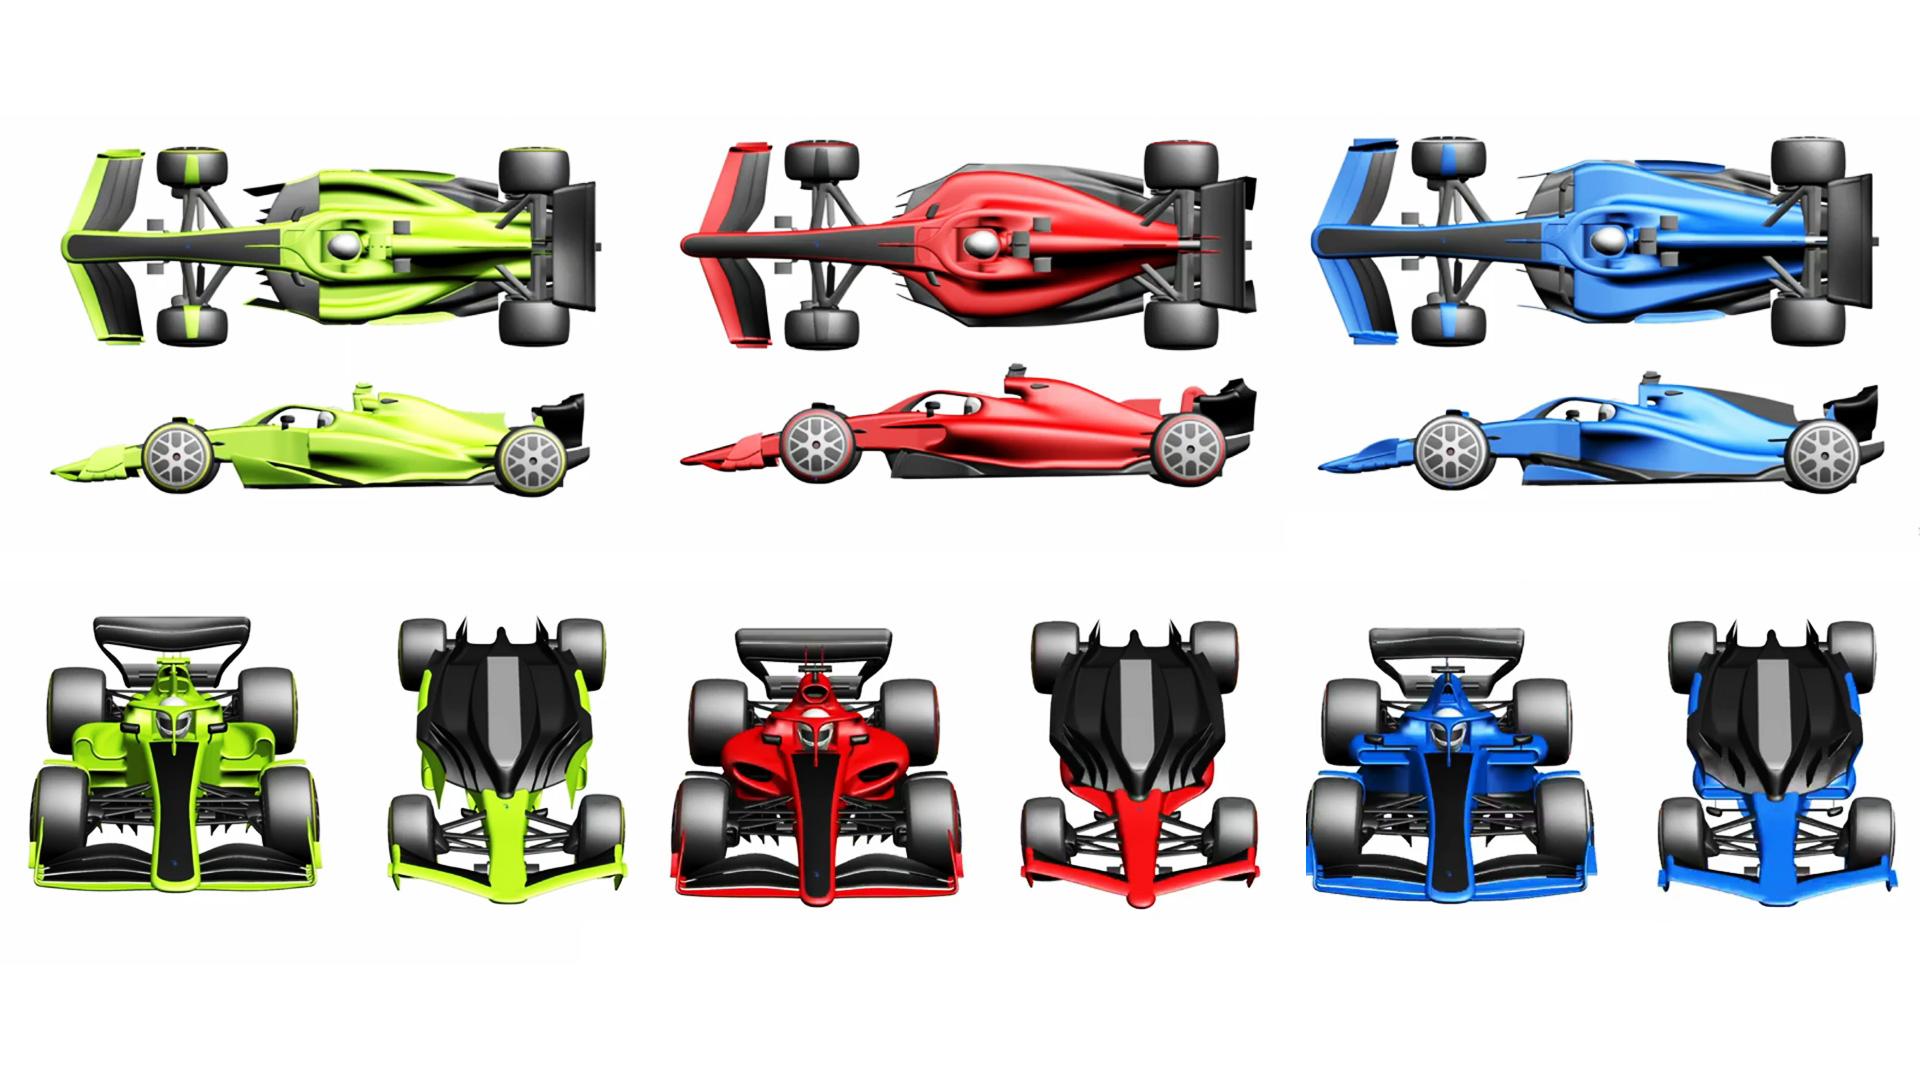 Fia New 2021 F1 Rules Won T Force All Cars To Look The Same